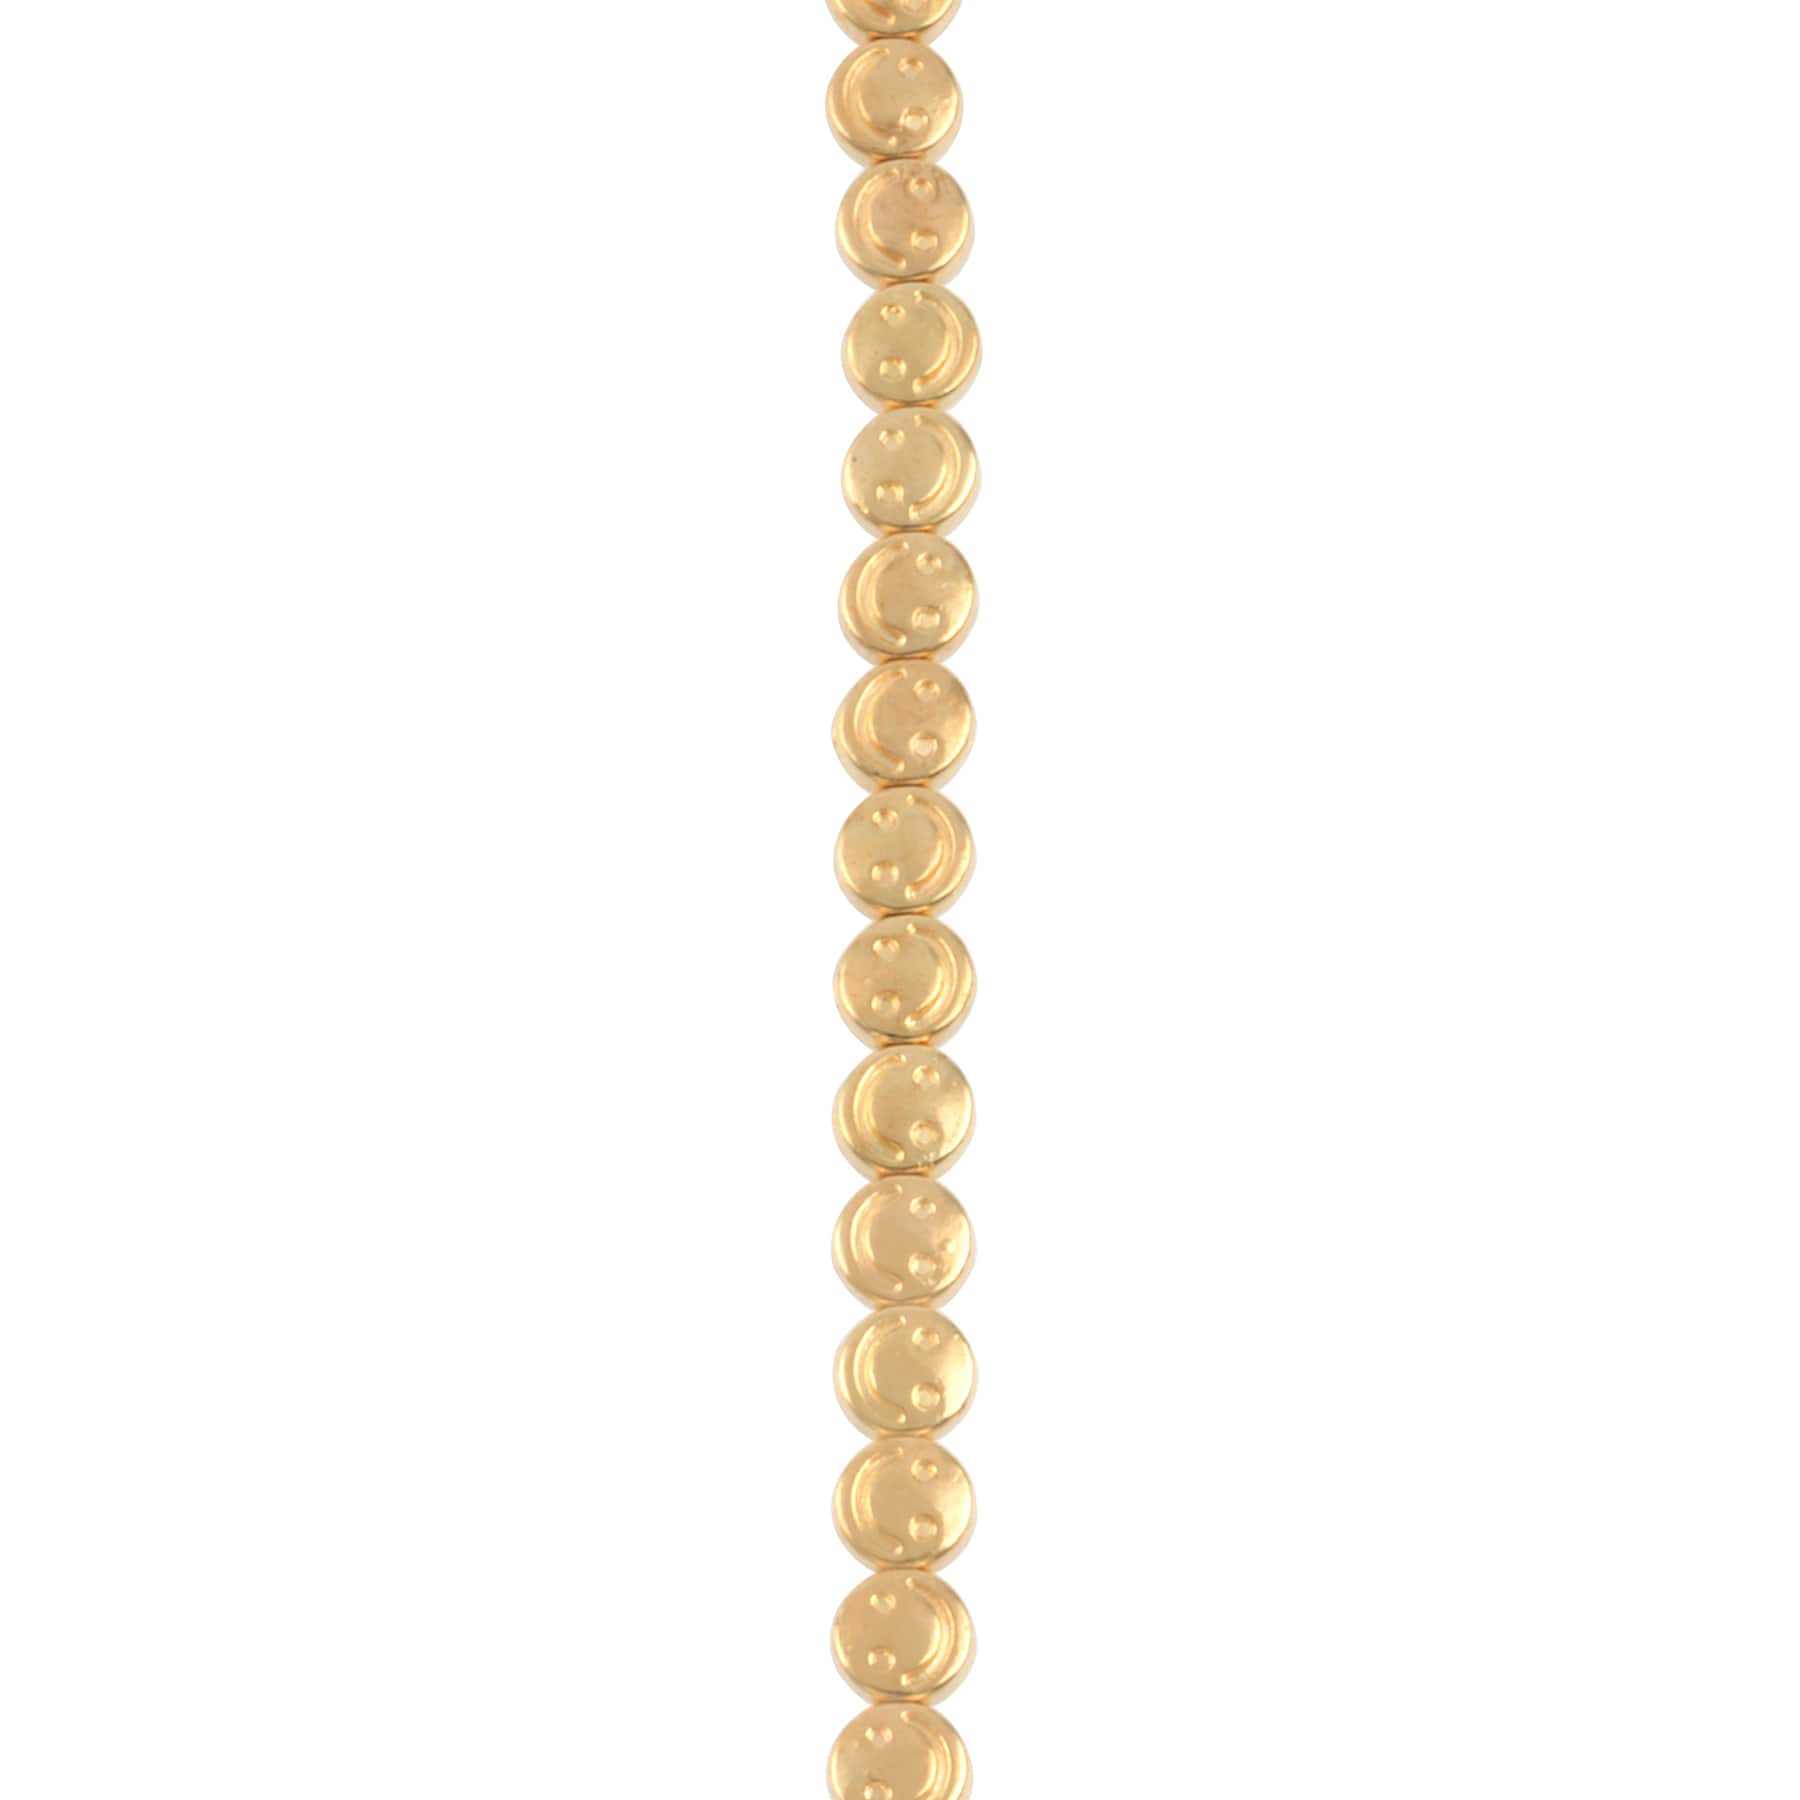 12 Packs: 32 ct. (384 total) Gold Metal Smiley Face Coin Beads, 5.5mm by Bead Landing&#x2122;